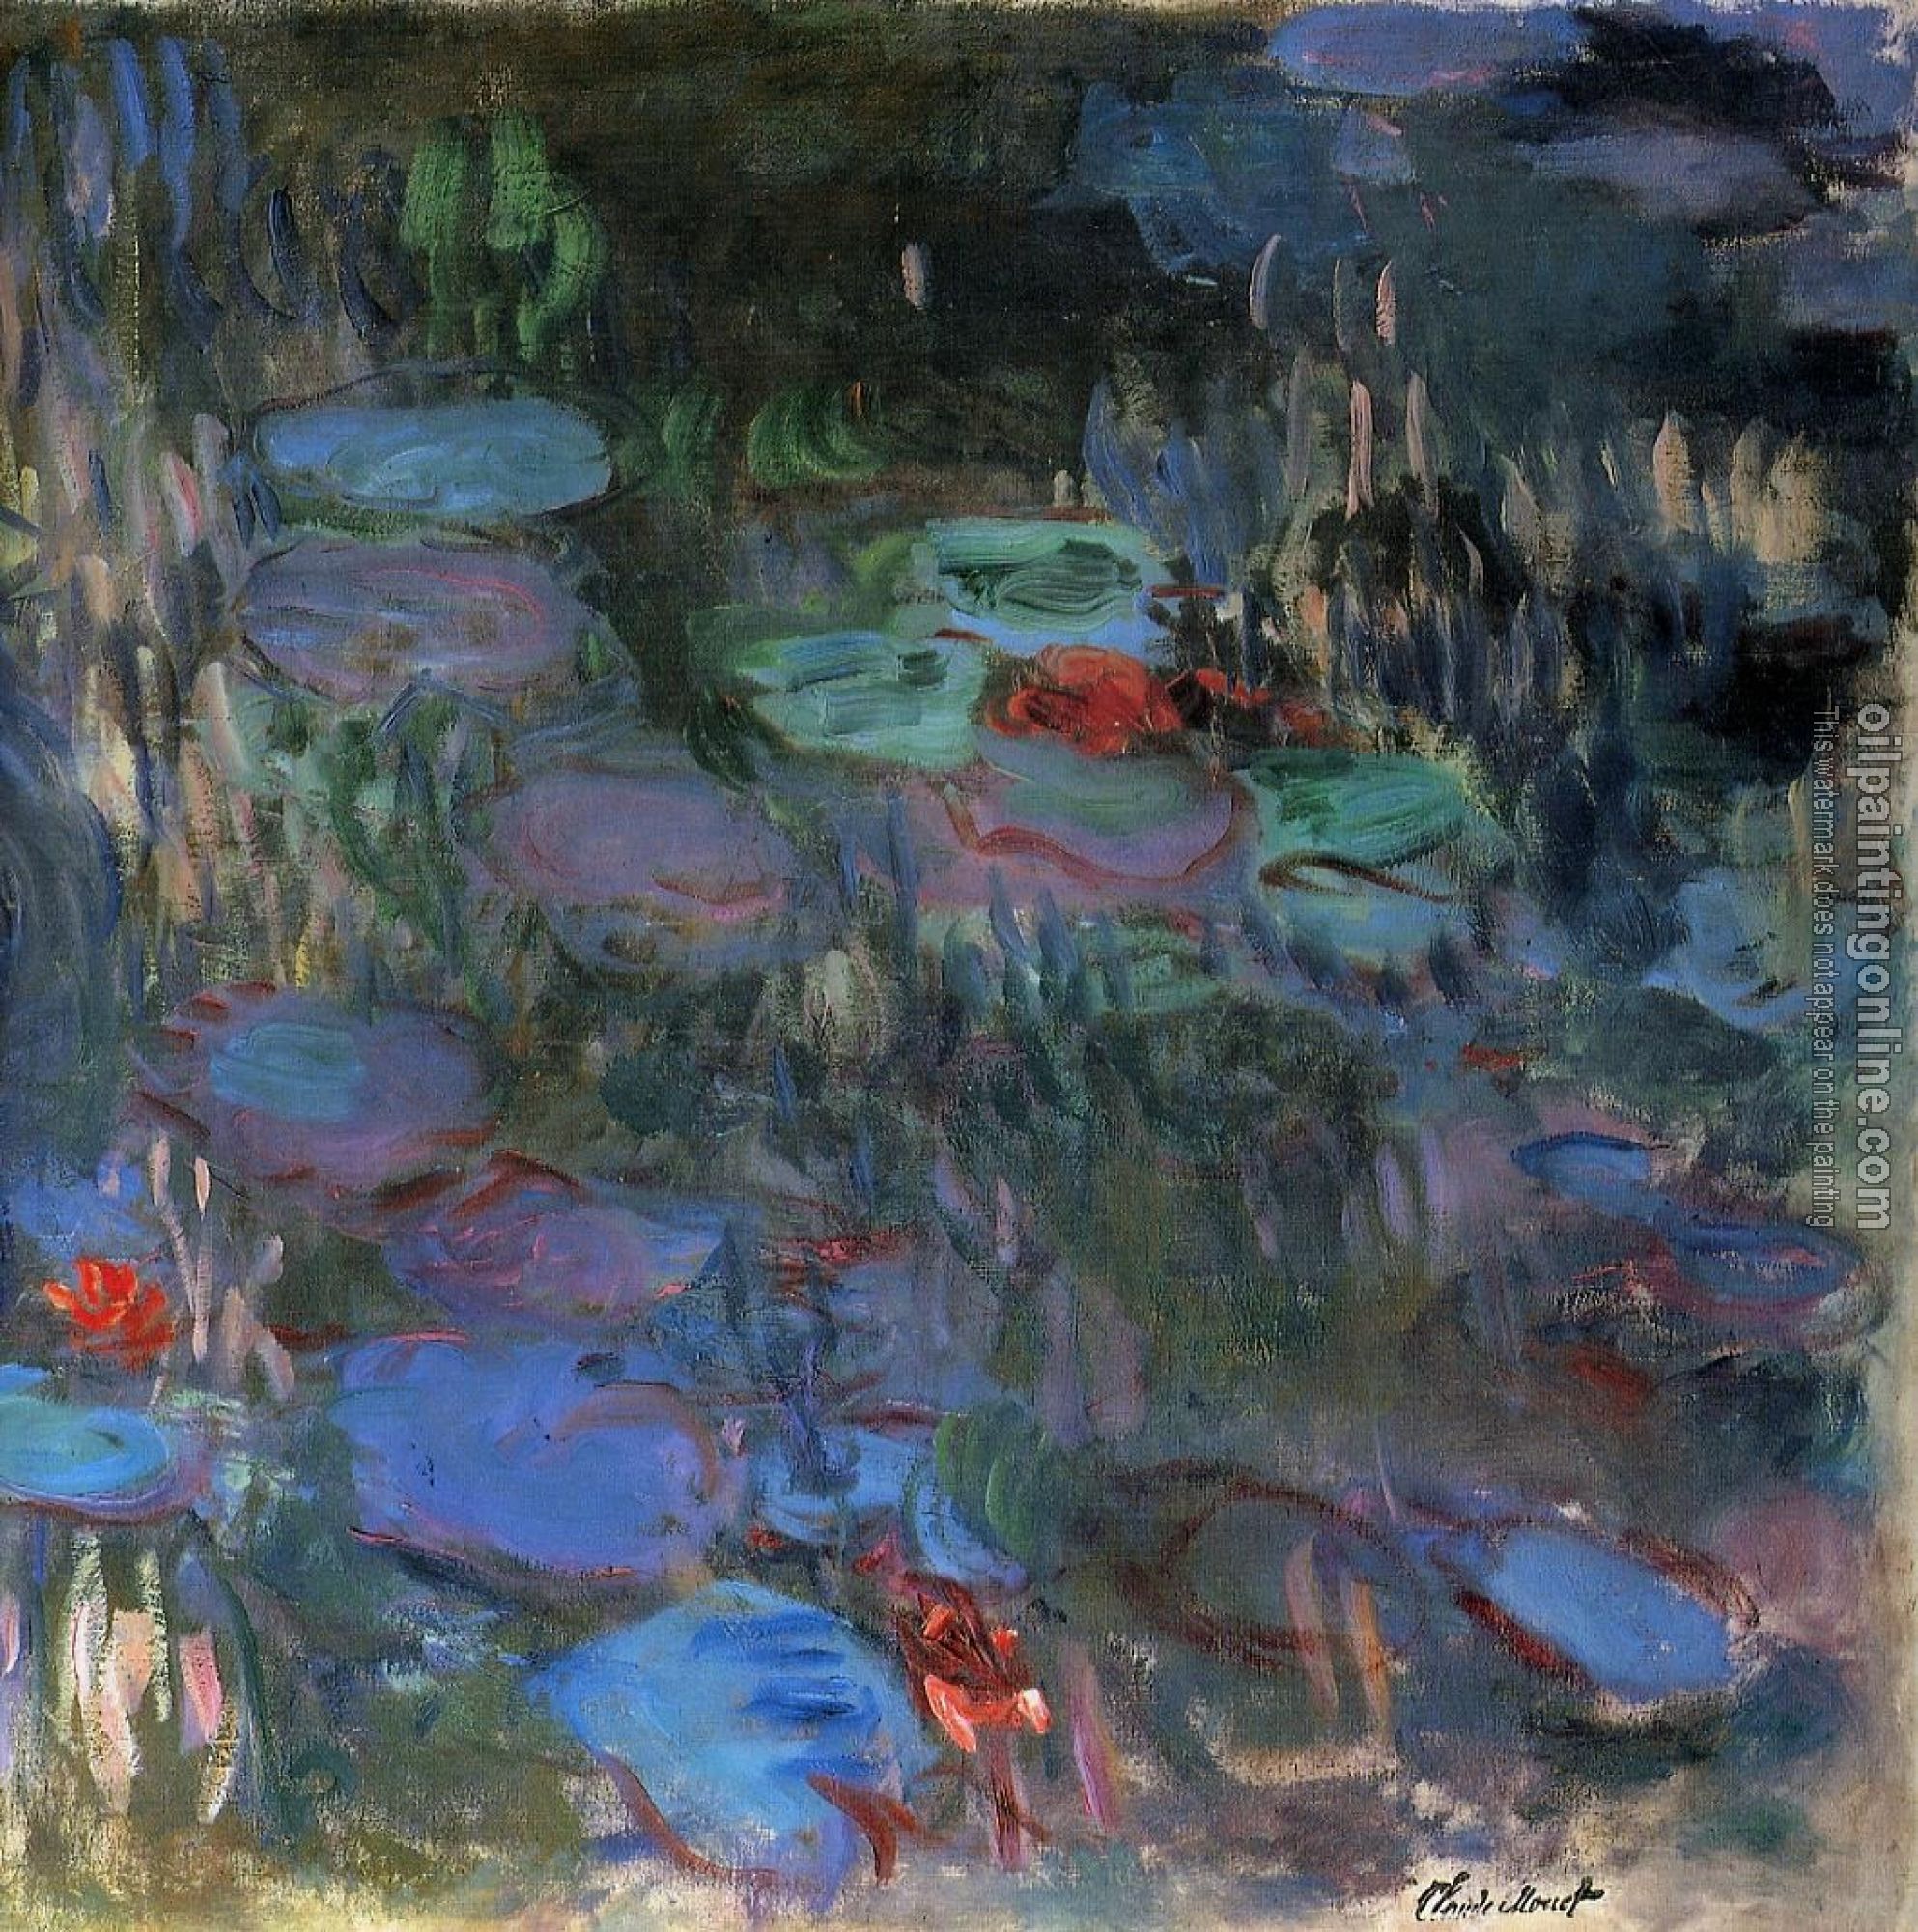 Monet, Claude Oscar - Water-Lilies, Reflections of Weeping Willows, right half